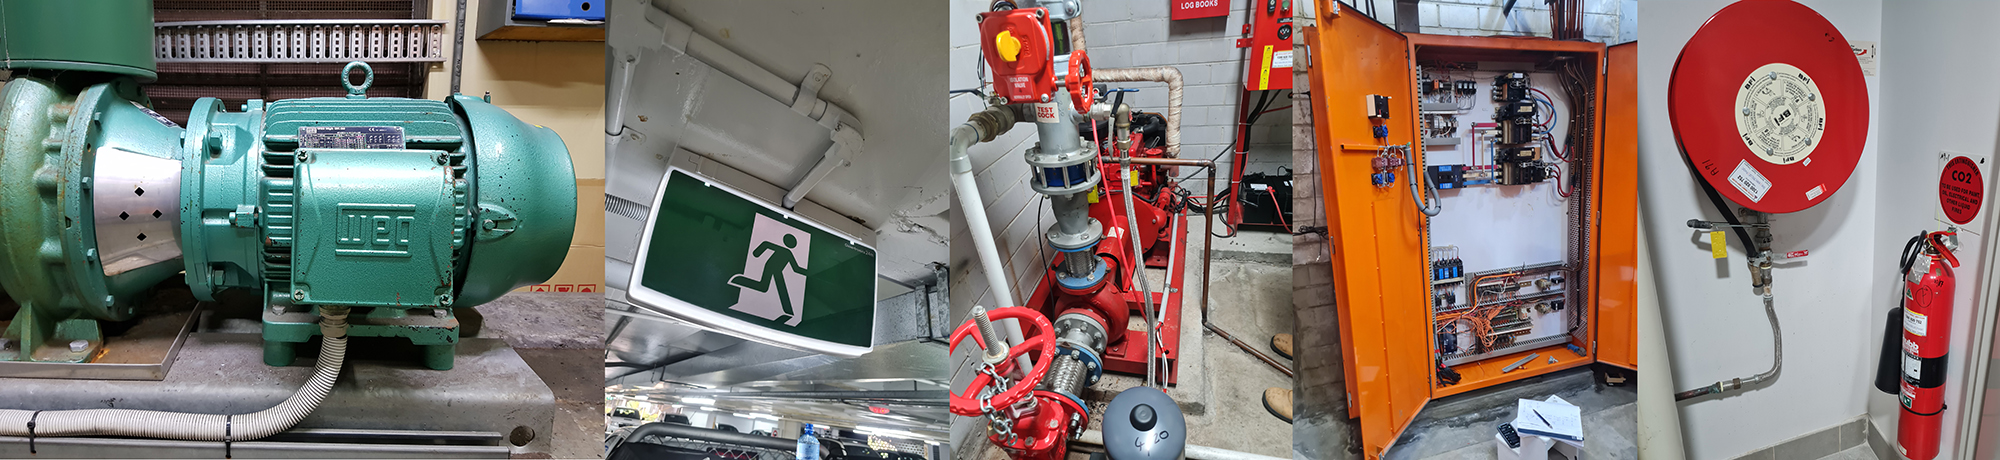 forte Banner with extinguishers, diesel hydrant pump, fire hose reel, chiller pump, HVAC, services, exit light and more